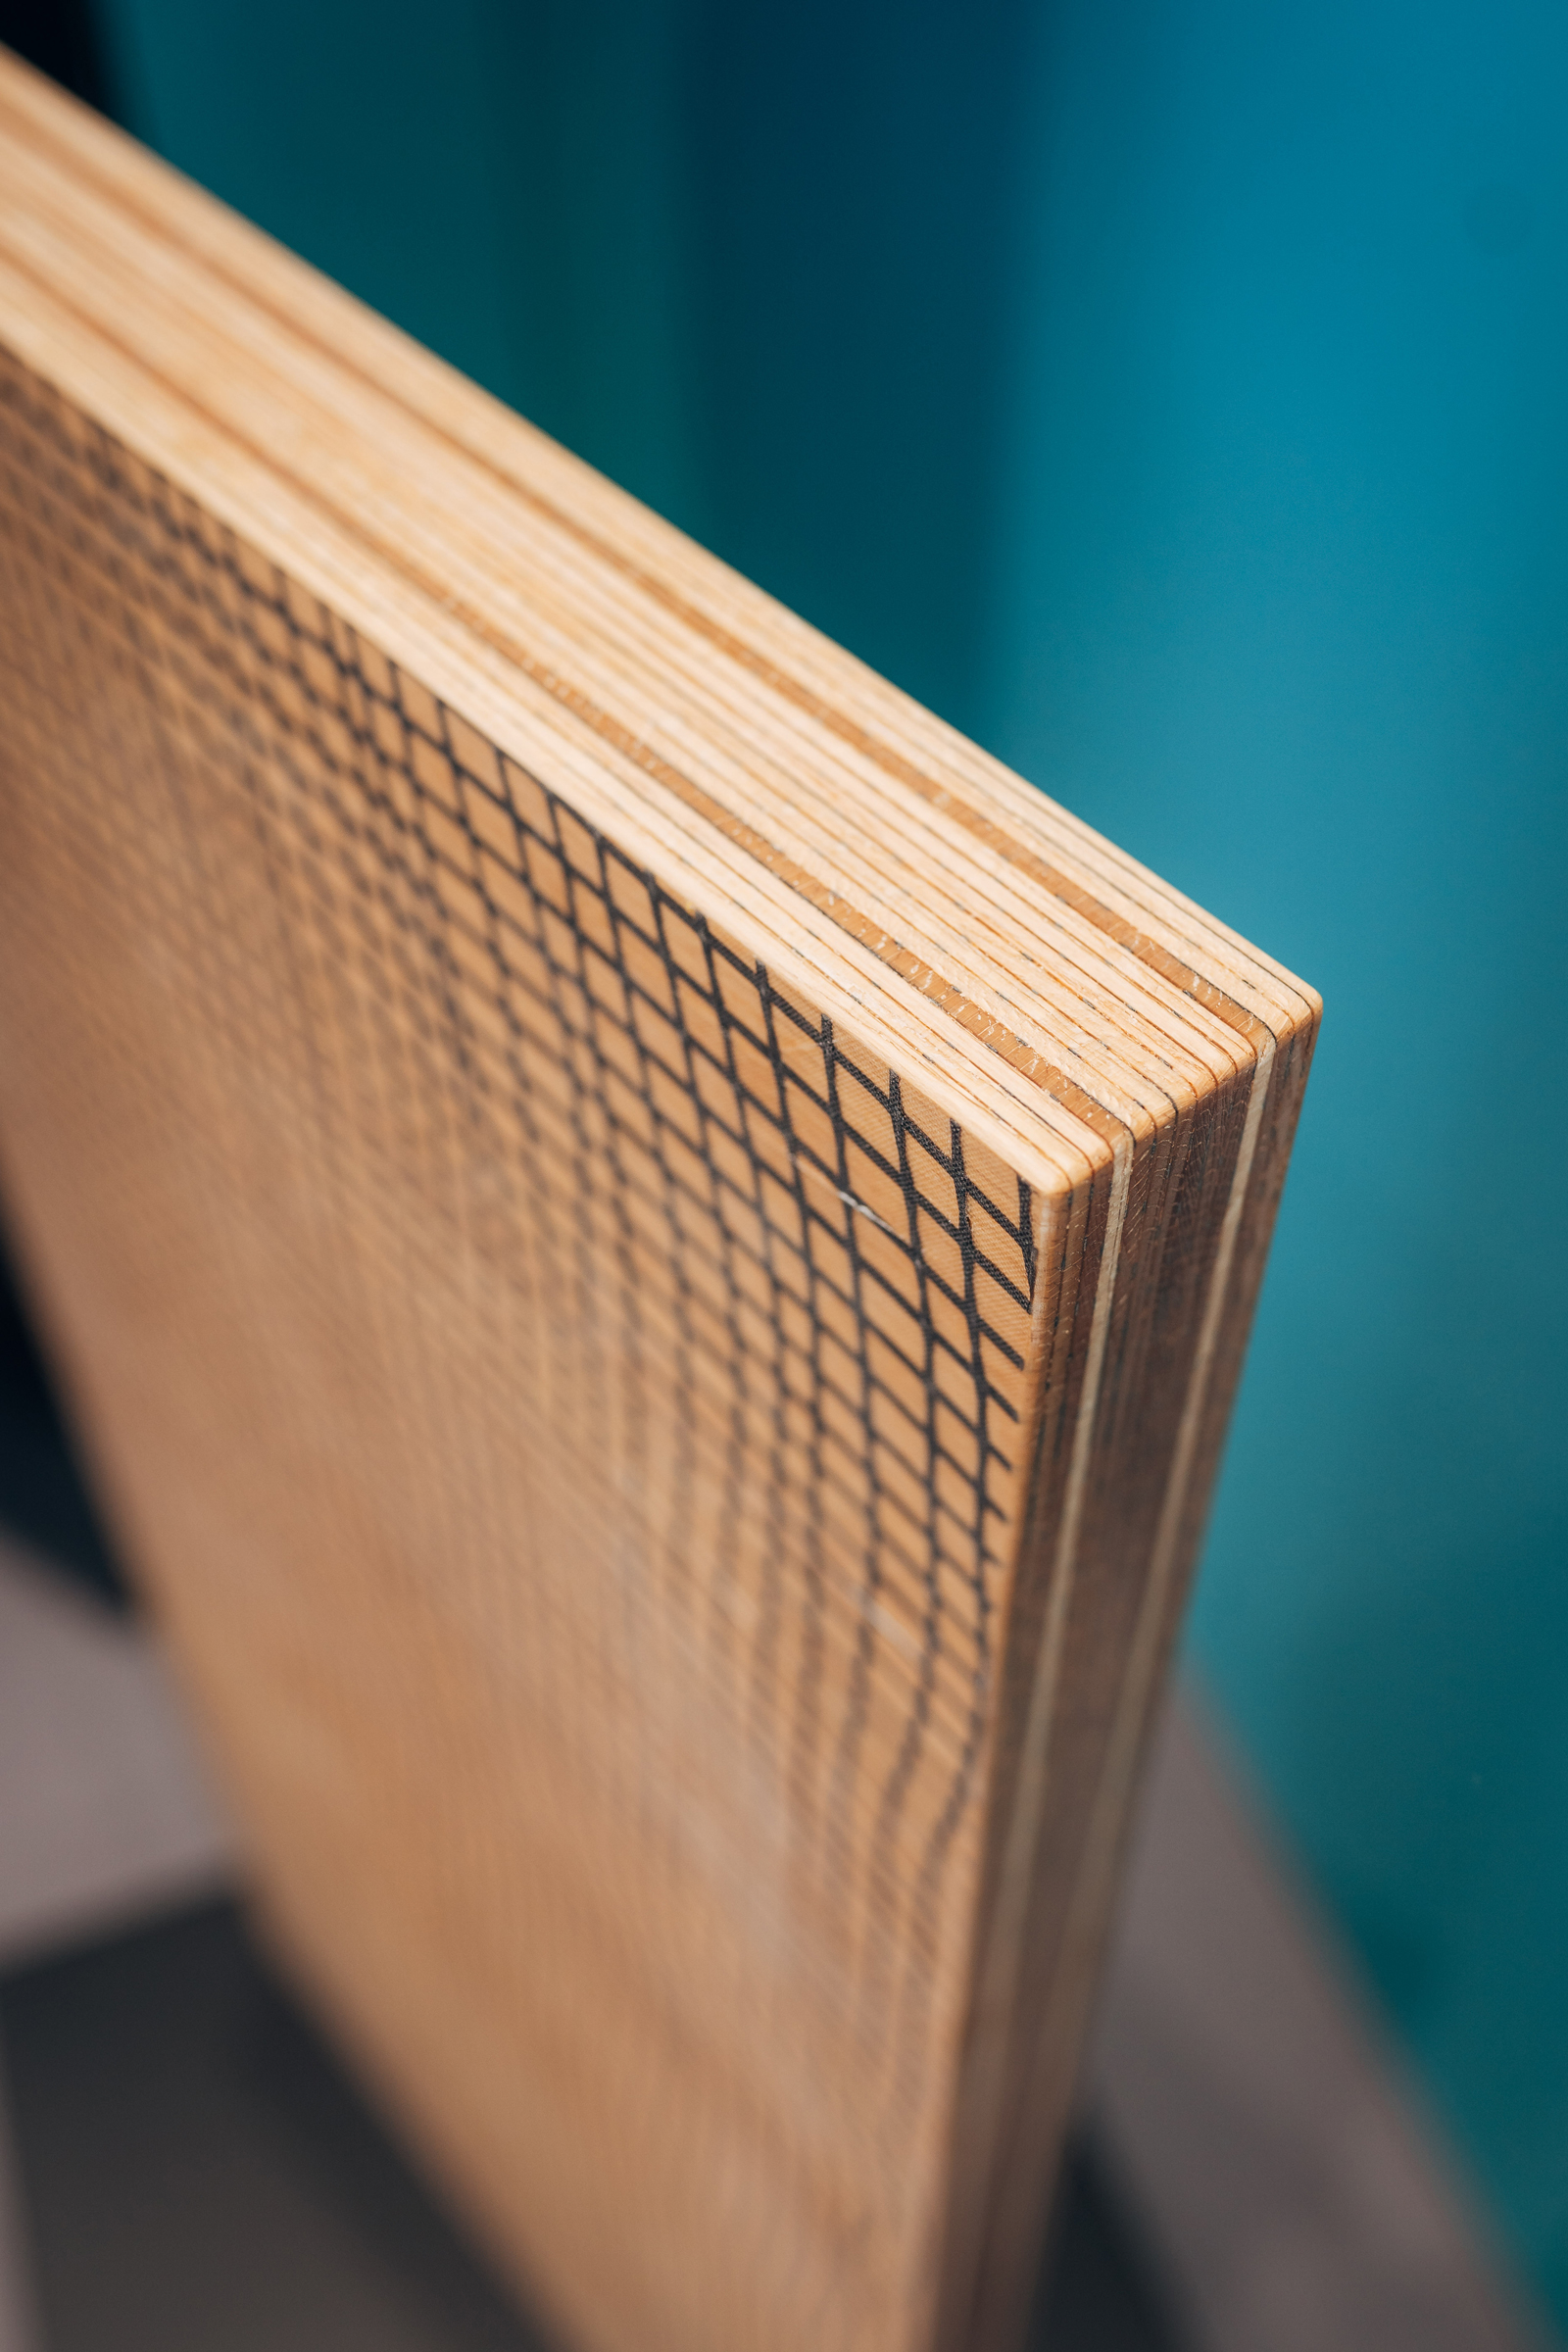 The photo shows a panel made of layers of veneer glued together. On the underside is a textile, net-like fabric.